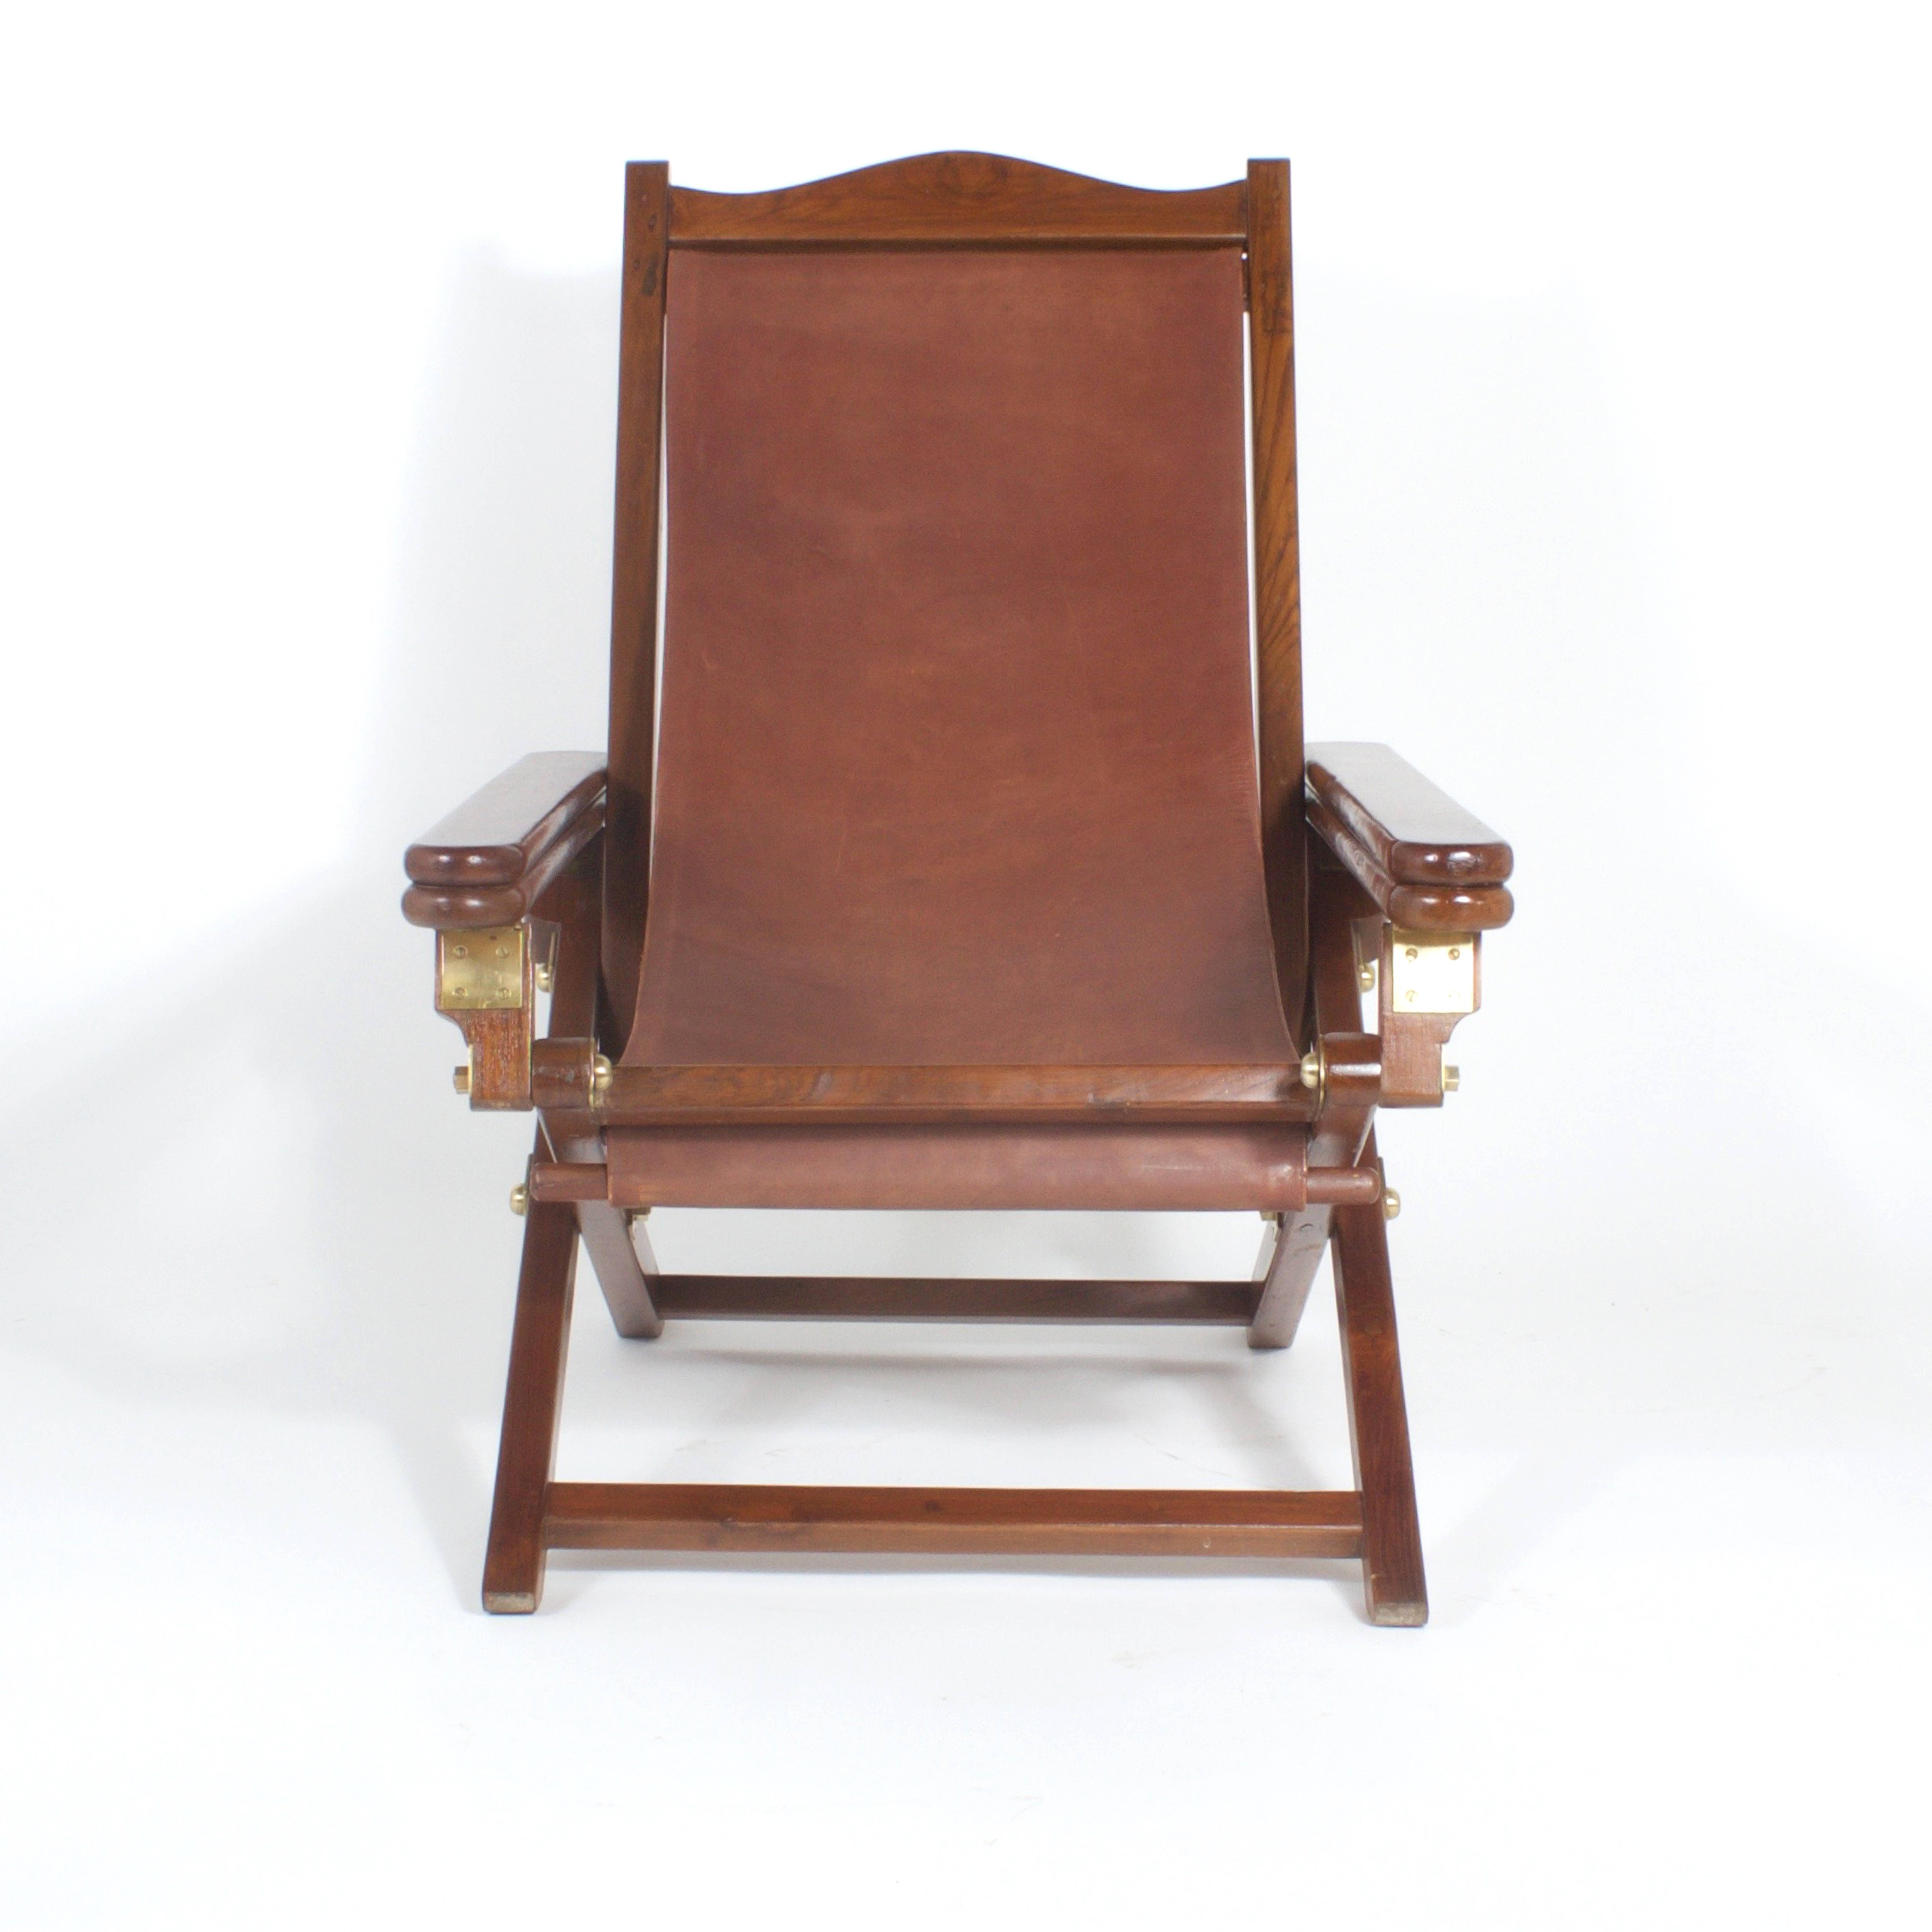 Handsome pair of Mid-Century mahogany folding chairs. The seats are soft, brown leather sling style with the backs being adjustable to four positions. Brass hardware is finely machines though slightly different on each chair. The extending footrest